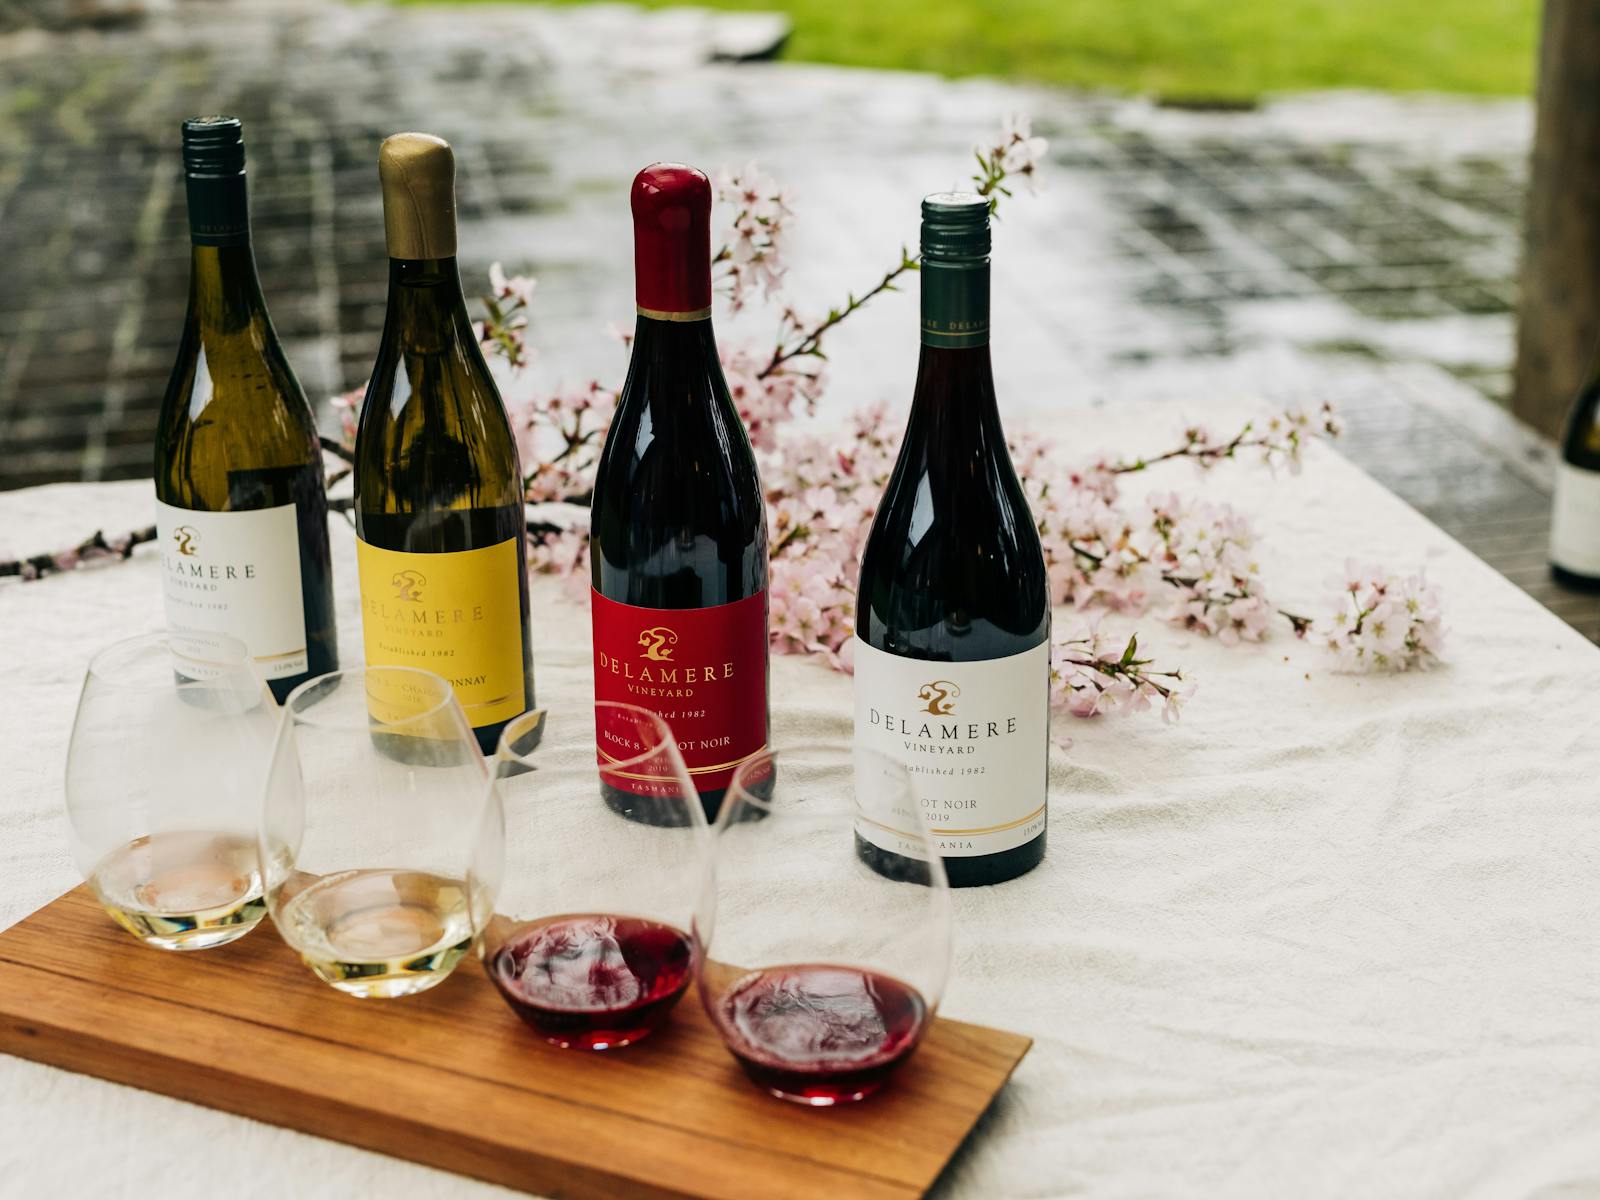 4 bottles of premium Delamere wines and a wine tasting flight ready to be enjoyed at cellar door